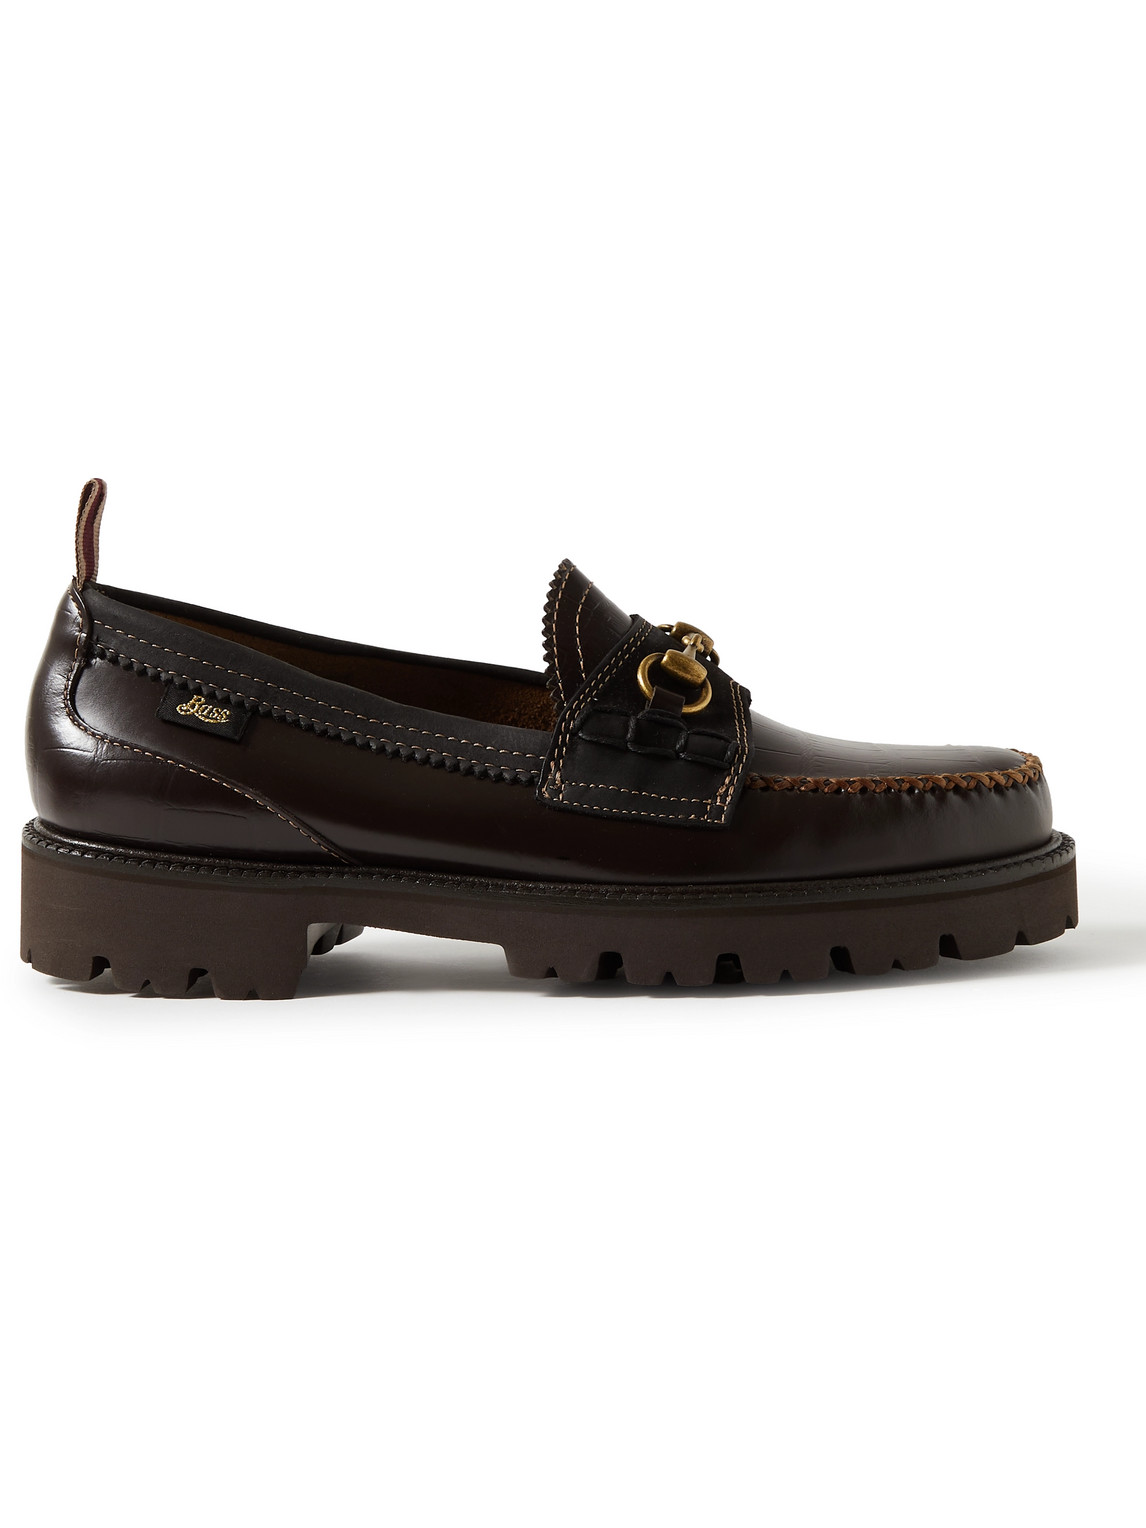 G.h. Bass & Co. X Nicholas Daley Leather Loafers In Brown